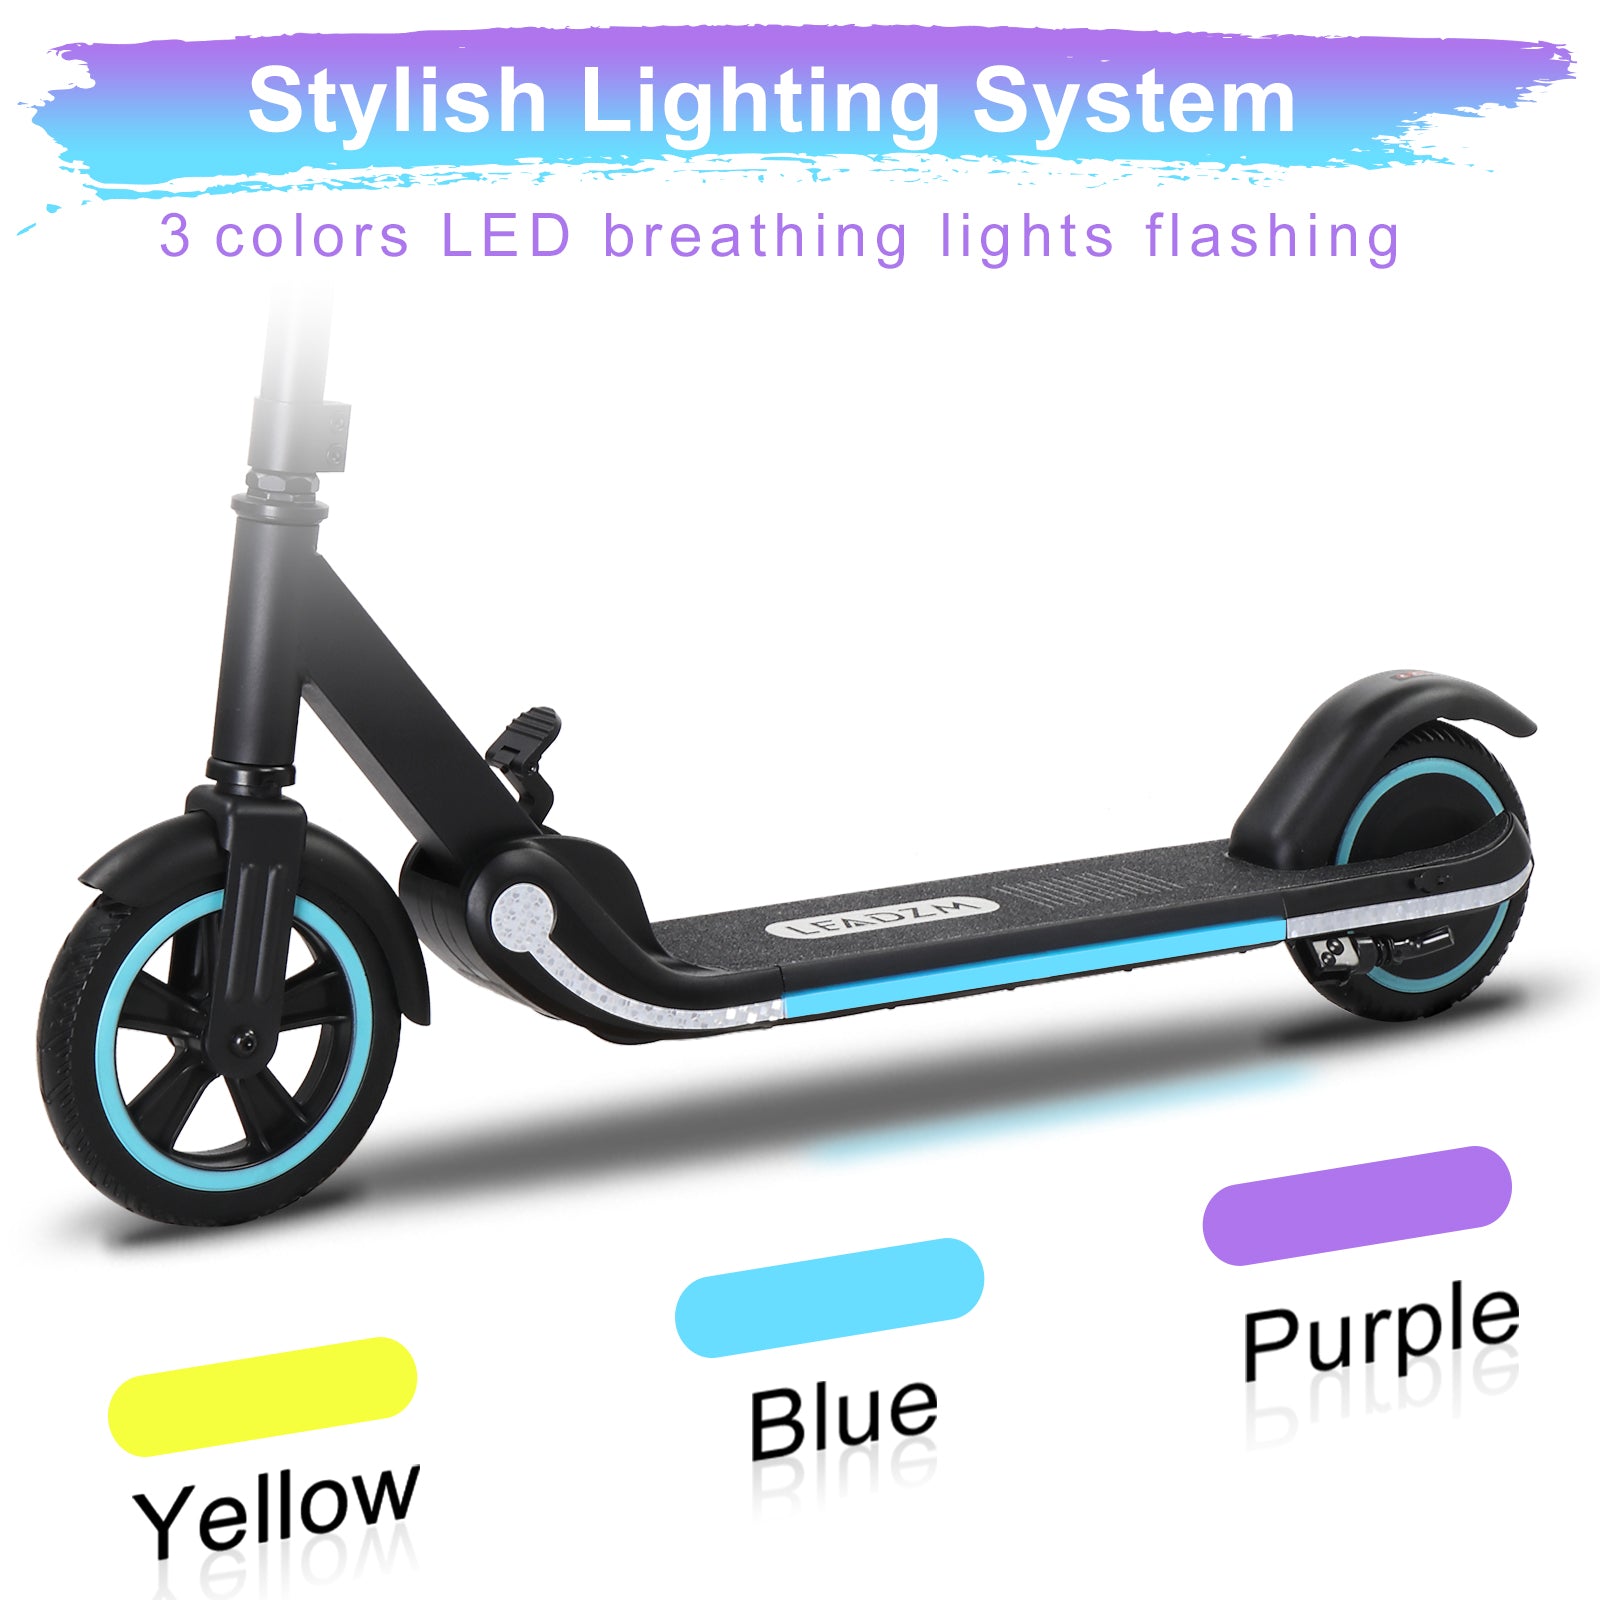 Electric Scooter for Kids Aged 6-14, Hub Motor Max Speed 9.3 mph Kids Scooter with 3 Flashing LEDS